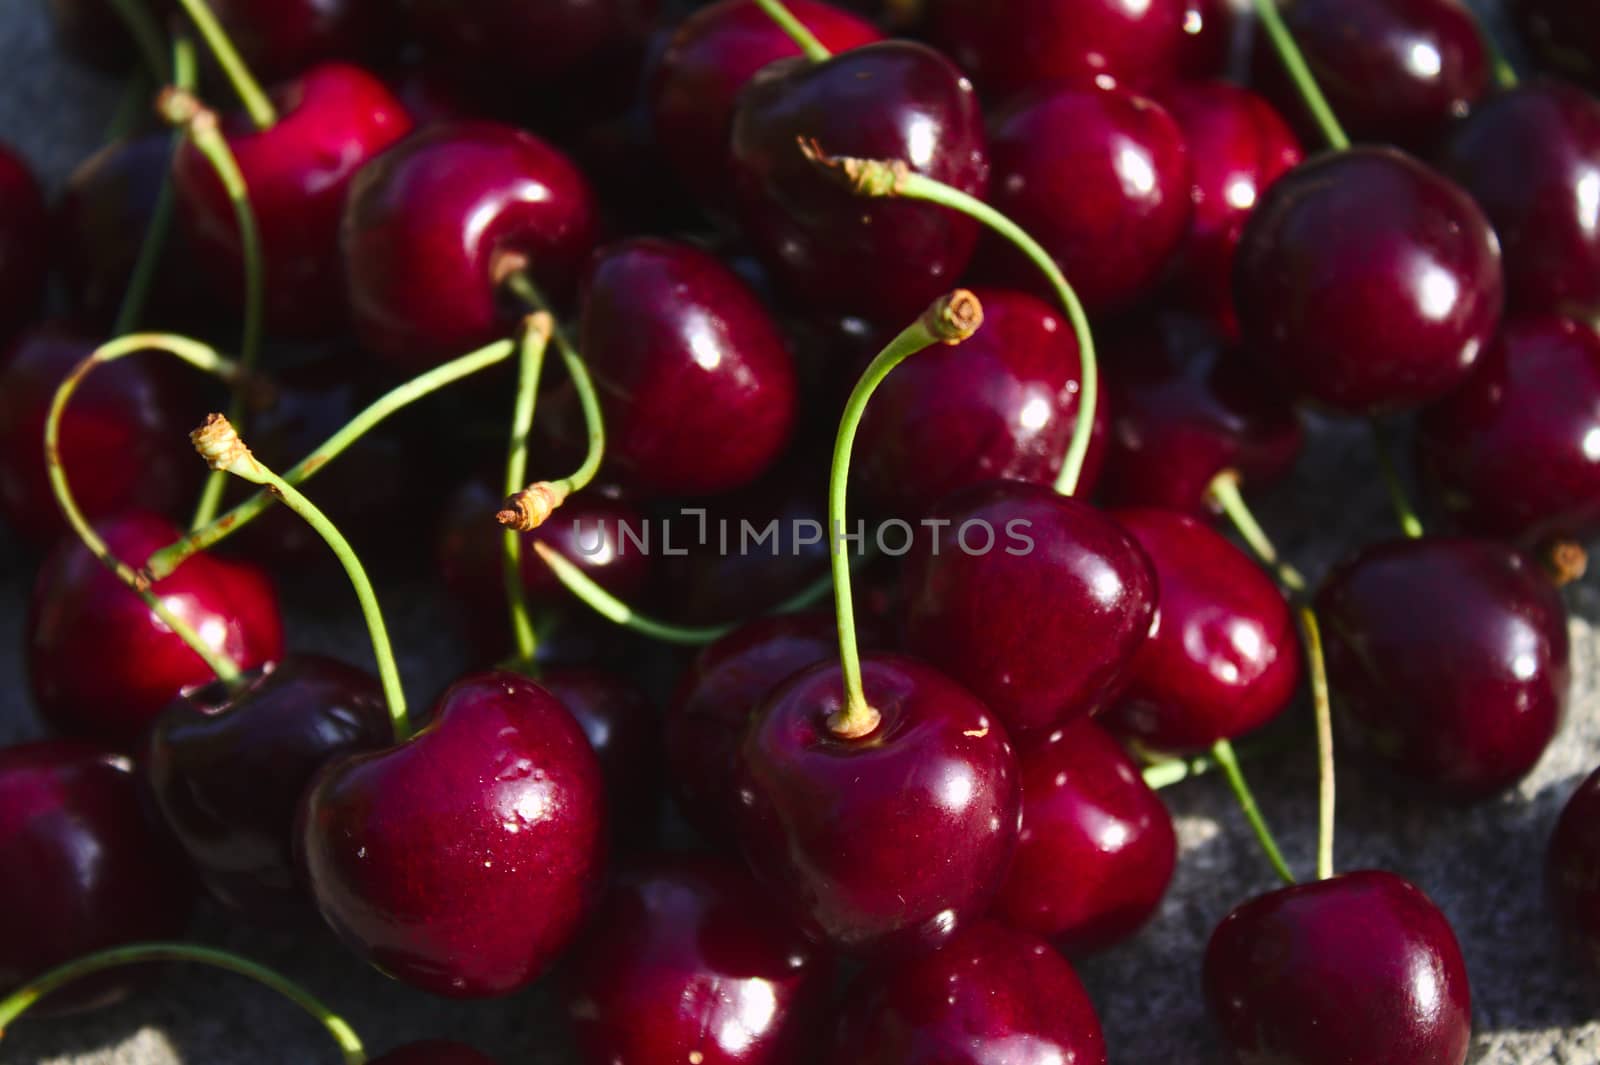 many delicious cherries after the harvest by martina_unbehauen